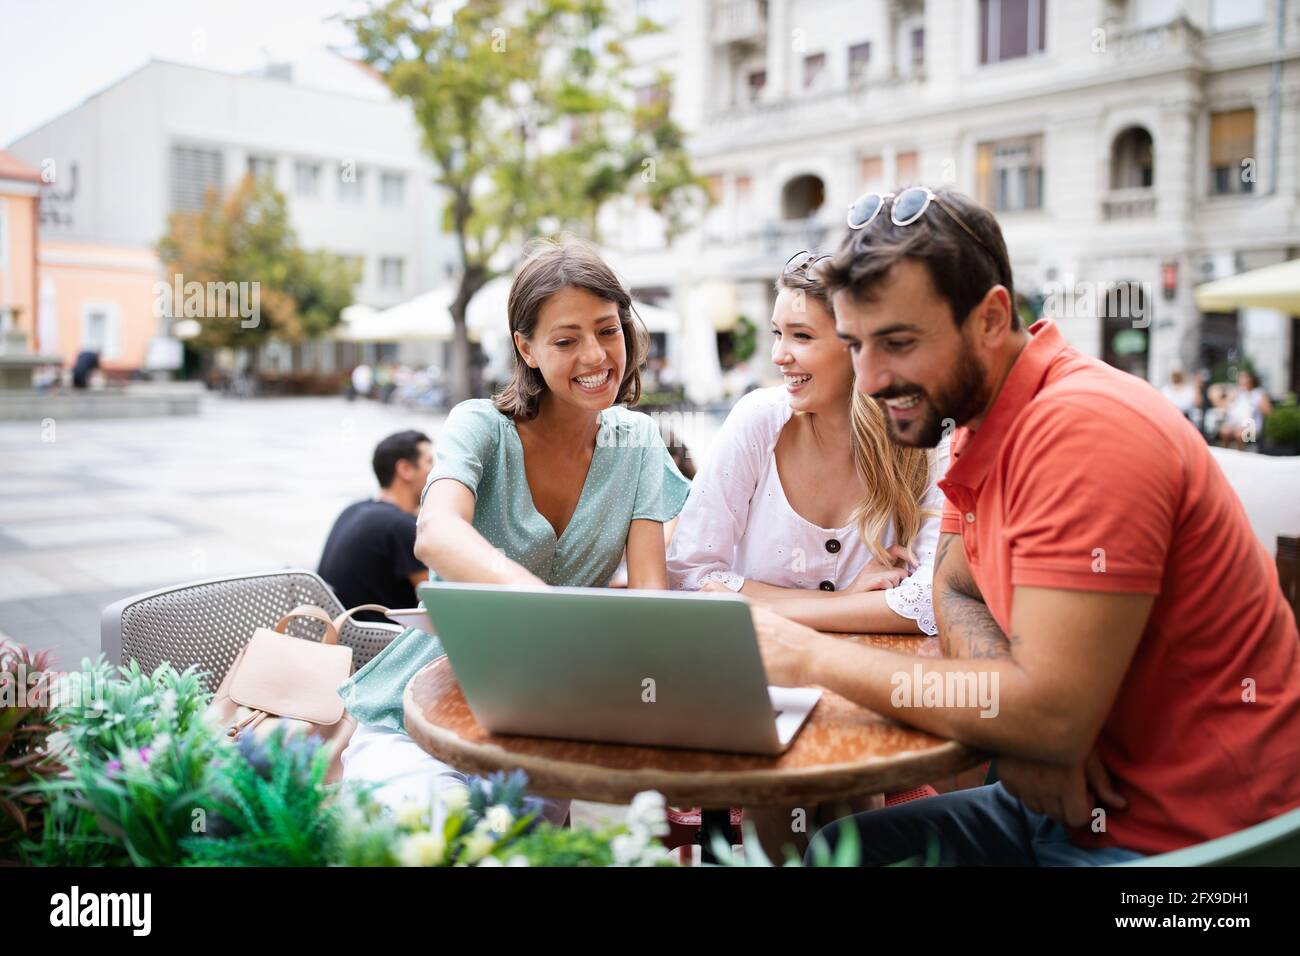 Friends at cafe talking laughing and enjoying their time using digital tablet. Stock Photo